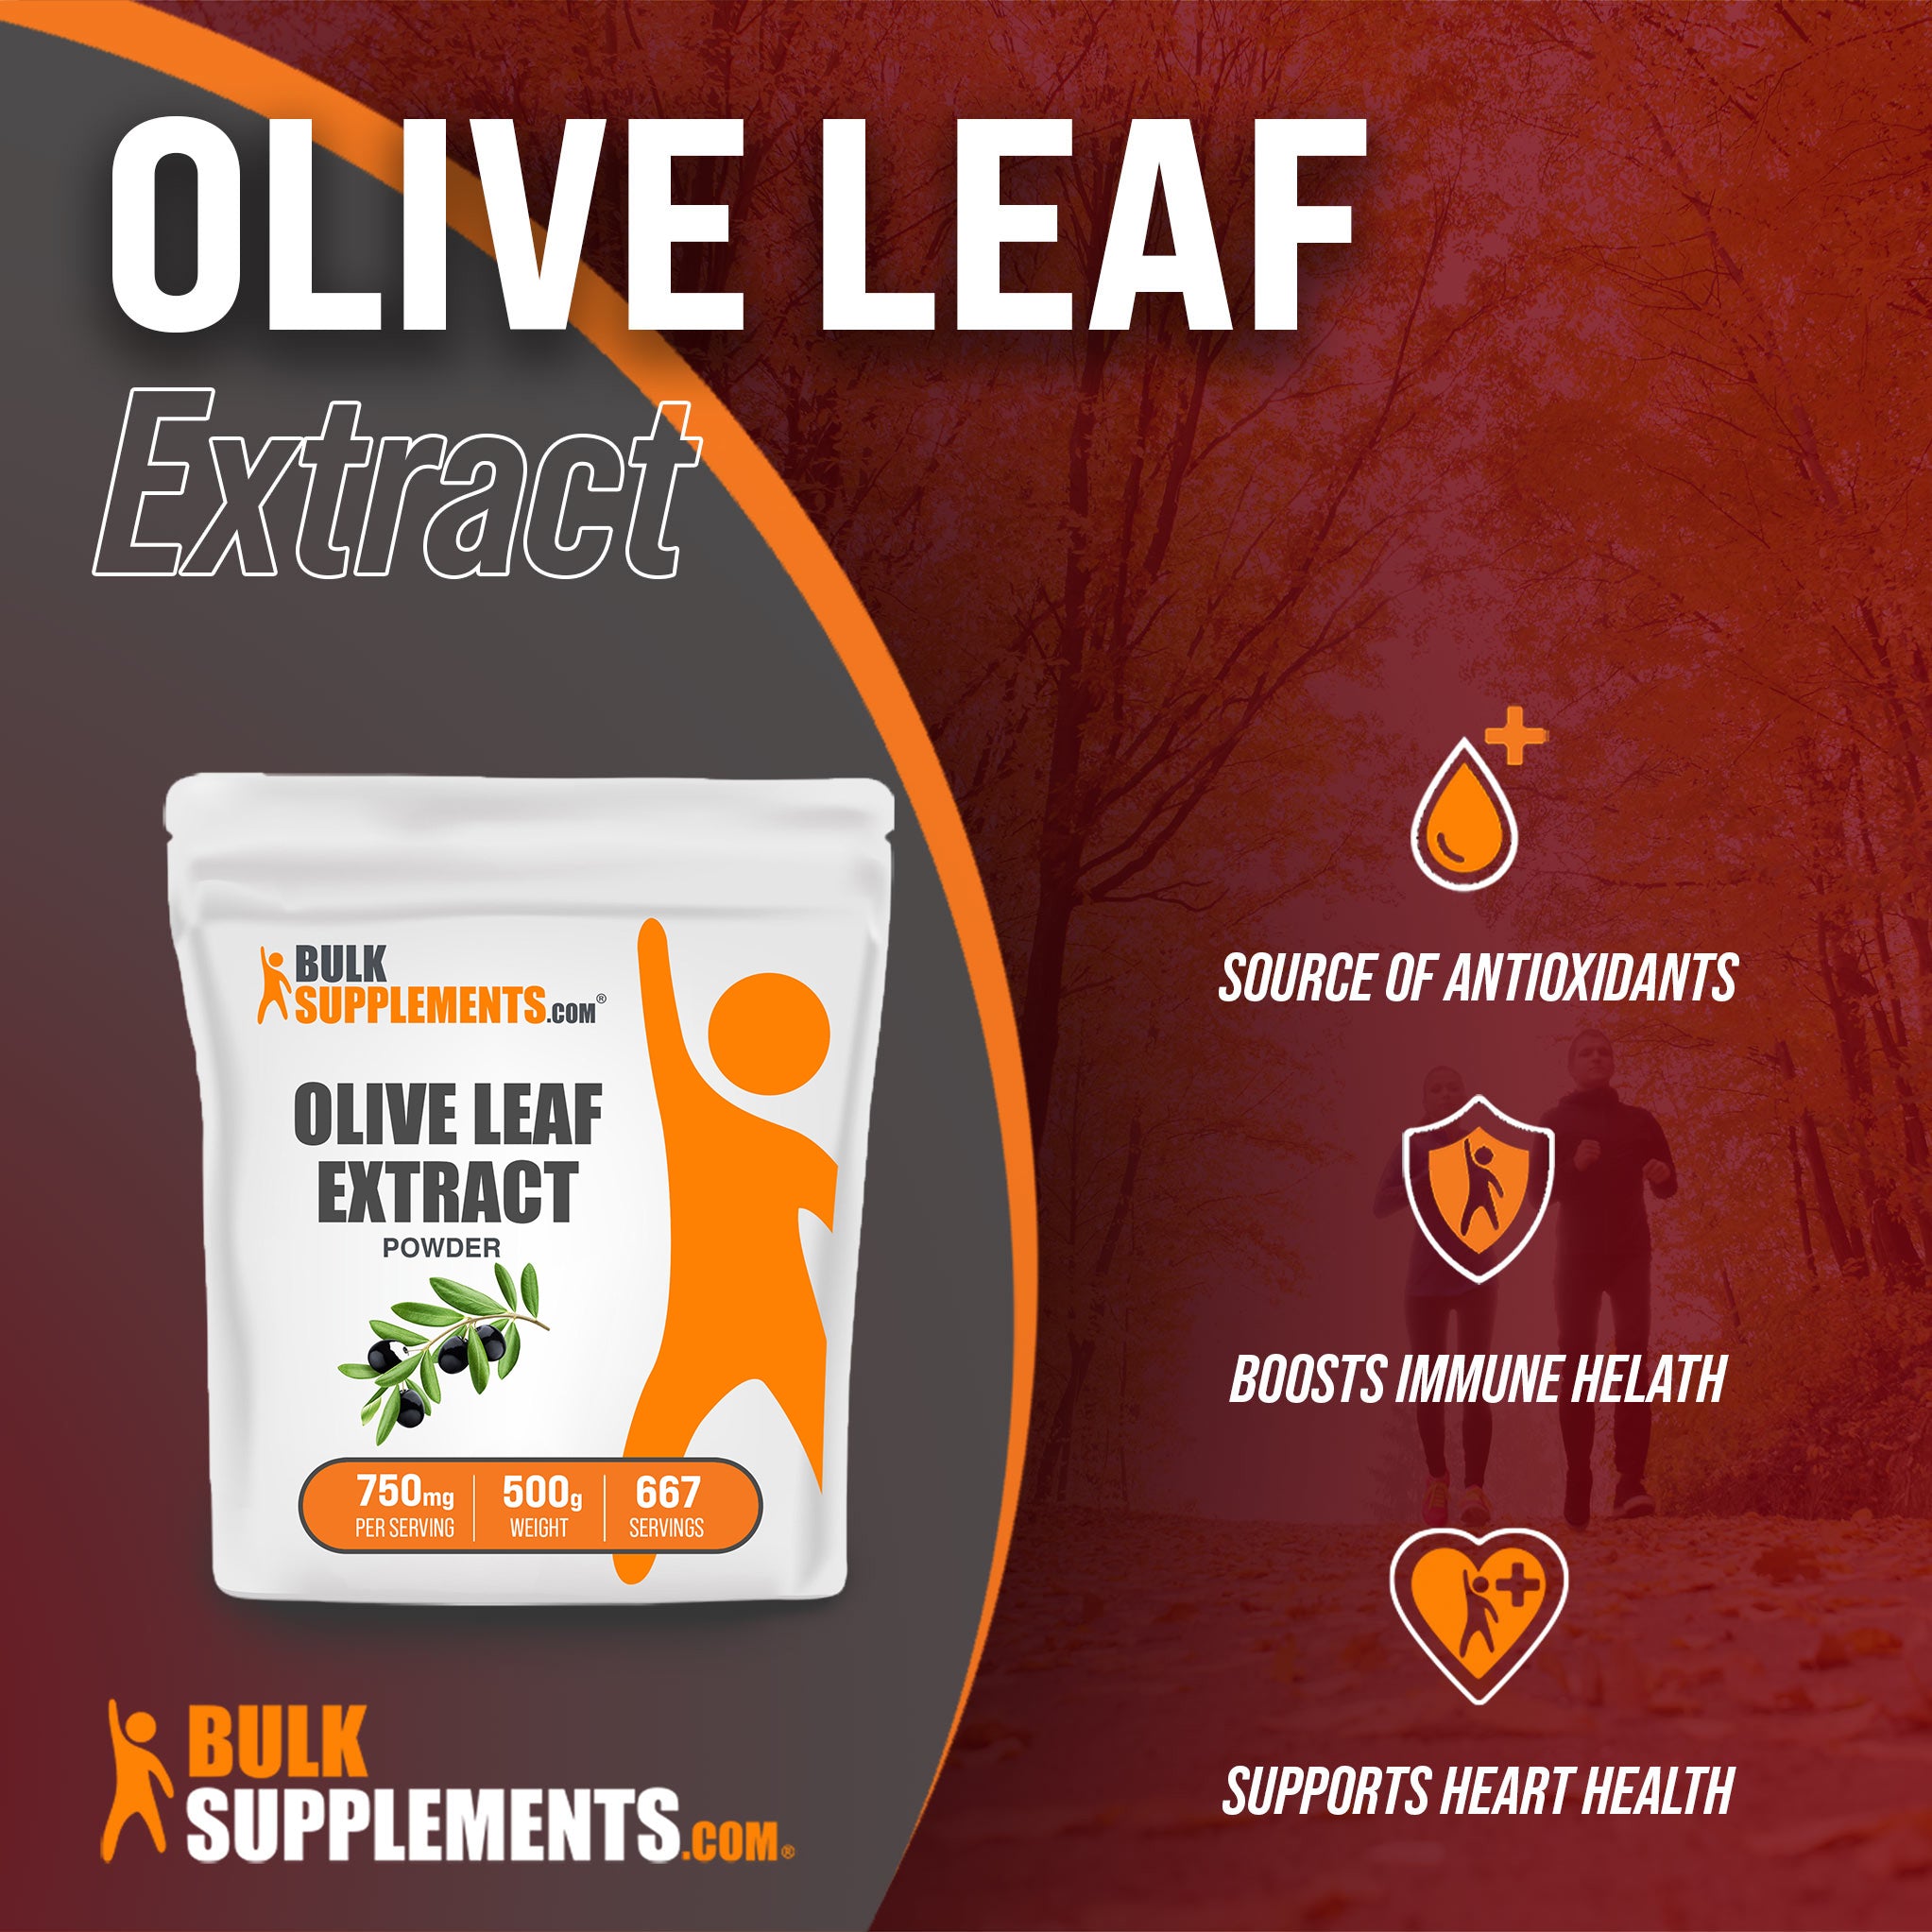 Benefits of Olive Leaf Extract: source of antioxidants, boosts immune health, supports heart health